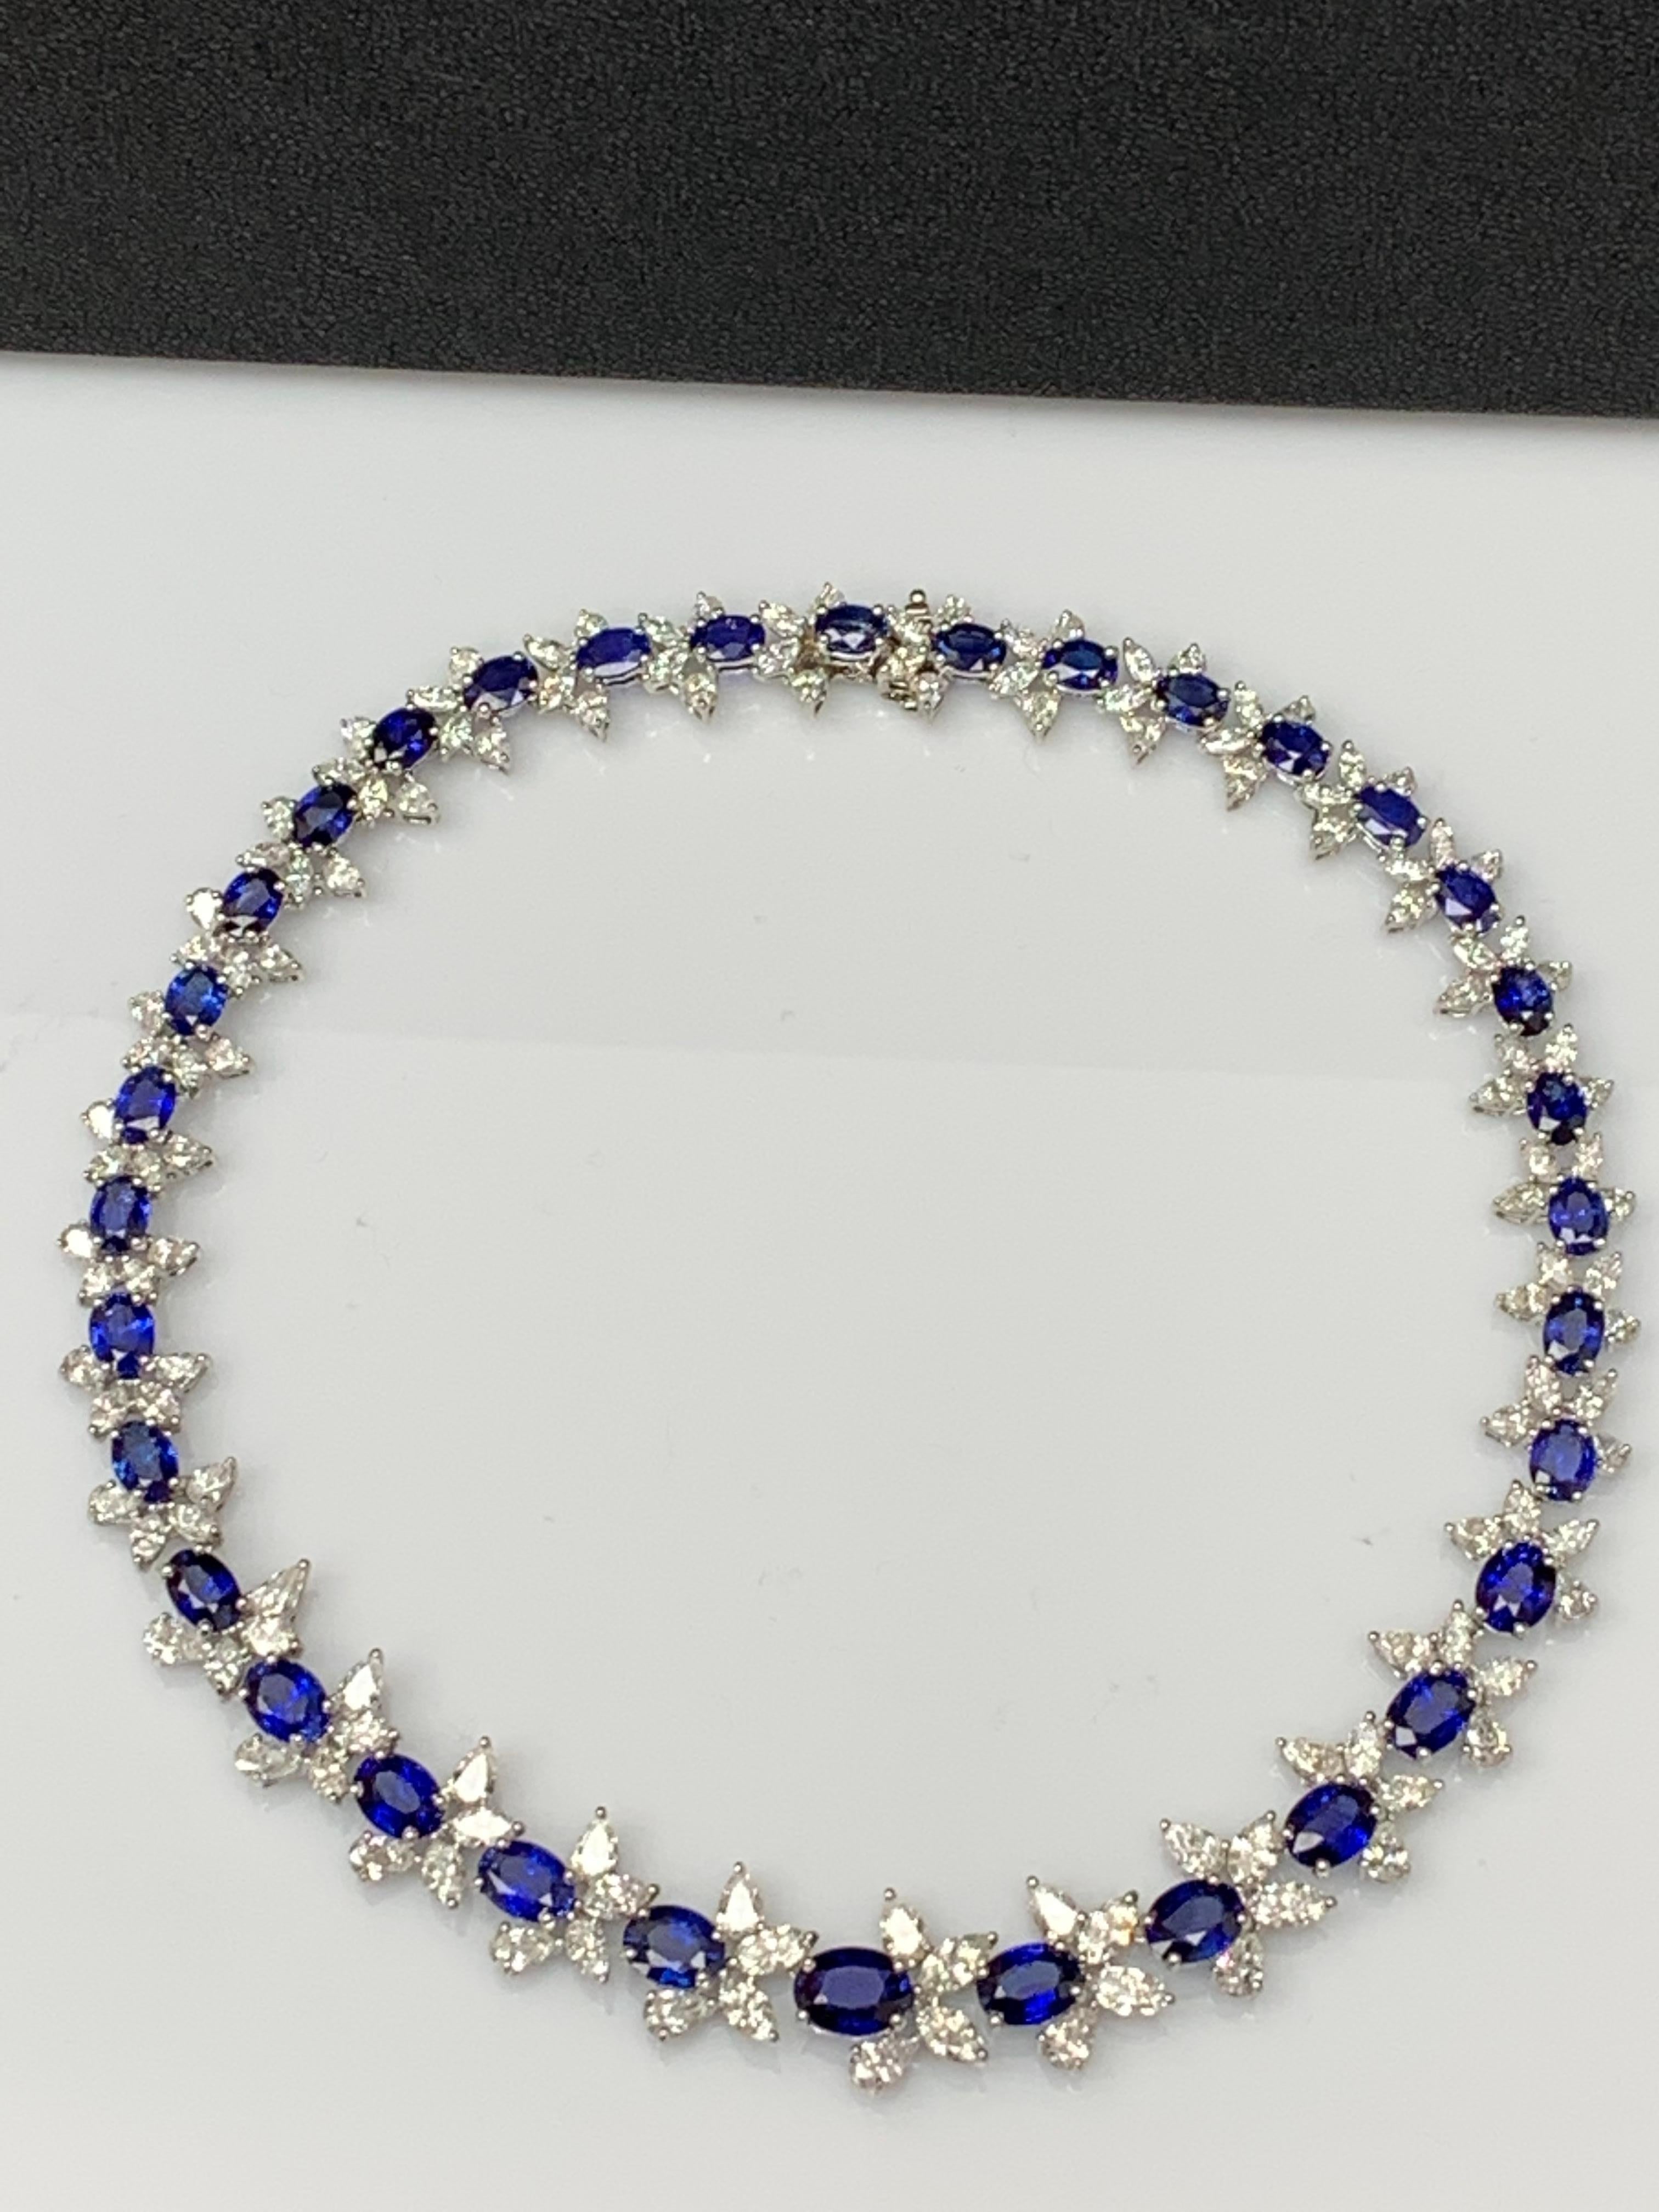 An important and very rare necklace showcasing vibrant and color-rich oval cut blue sapphires, set in a beautiful design. An intricately-designed necklace accented with brilliant mixed cut diamonds in a platinum mounting. 34 Blue Sapphires weigh